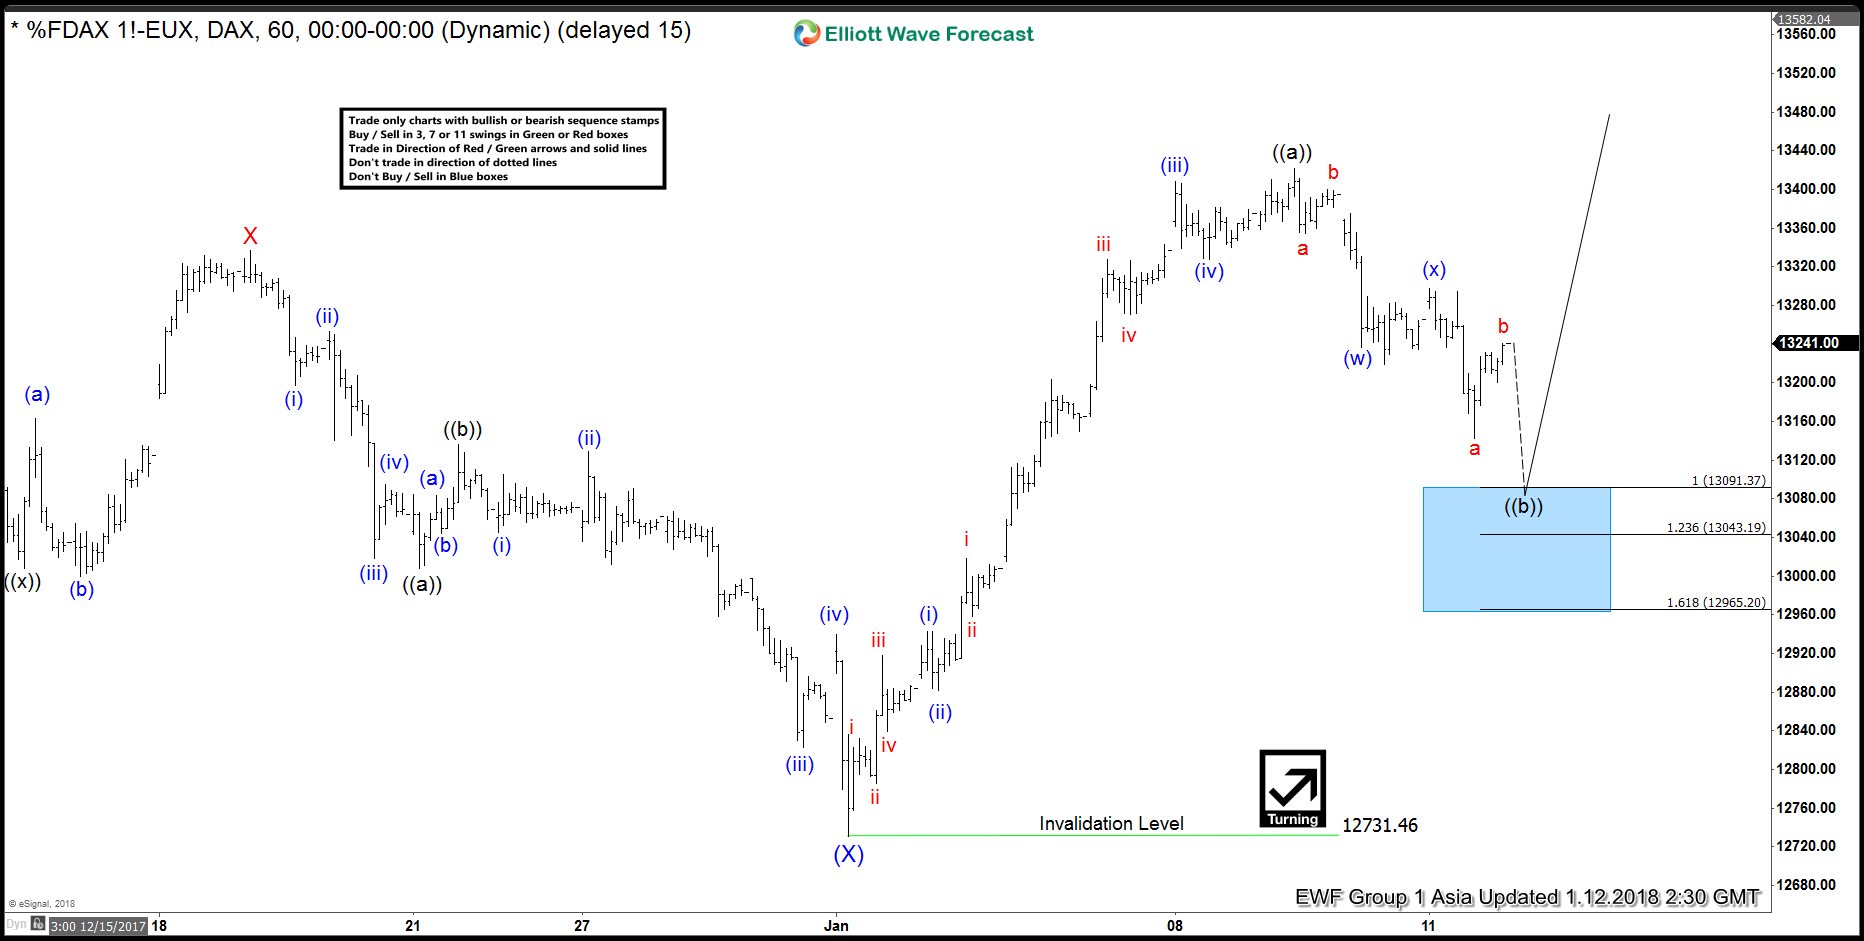 Elliott Wave Analysis: DAX Looking to End Correction